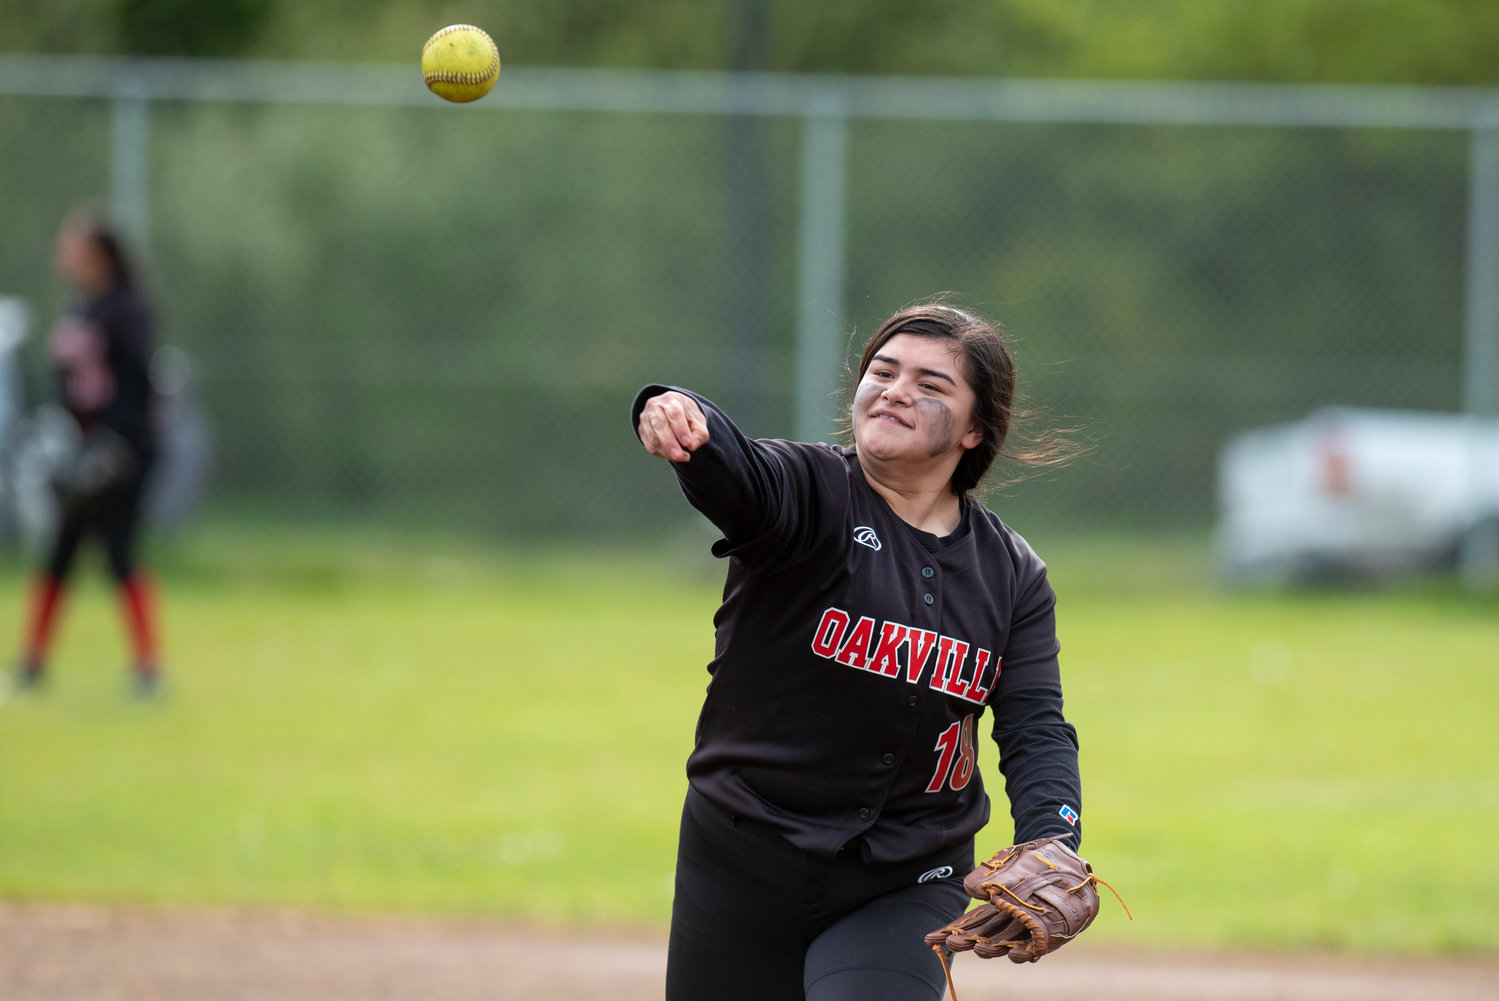 An Oakville infielder throws to first base during a home game against Mossyrock on April 28.